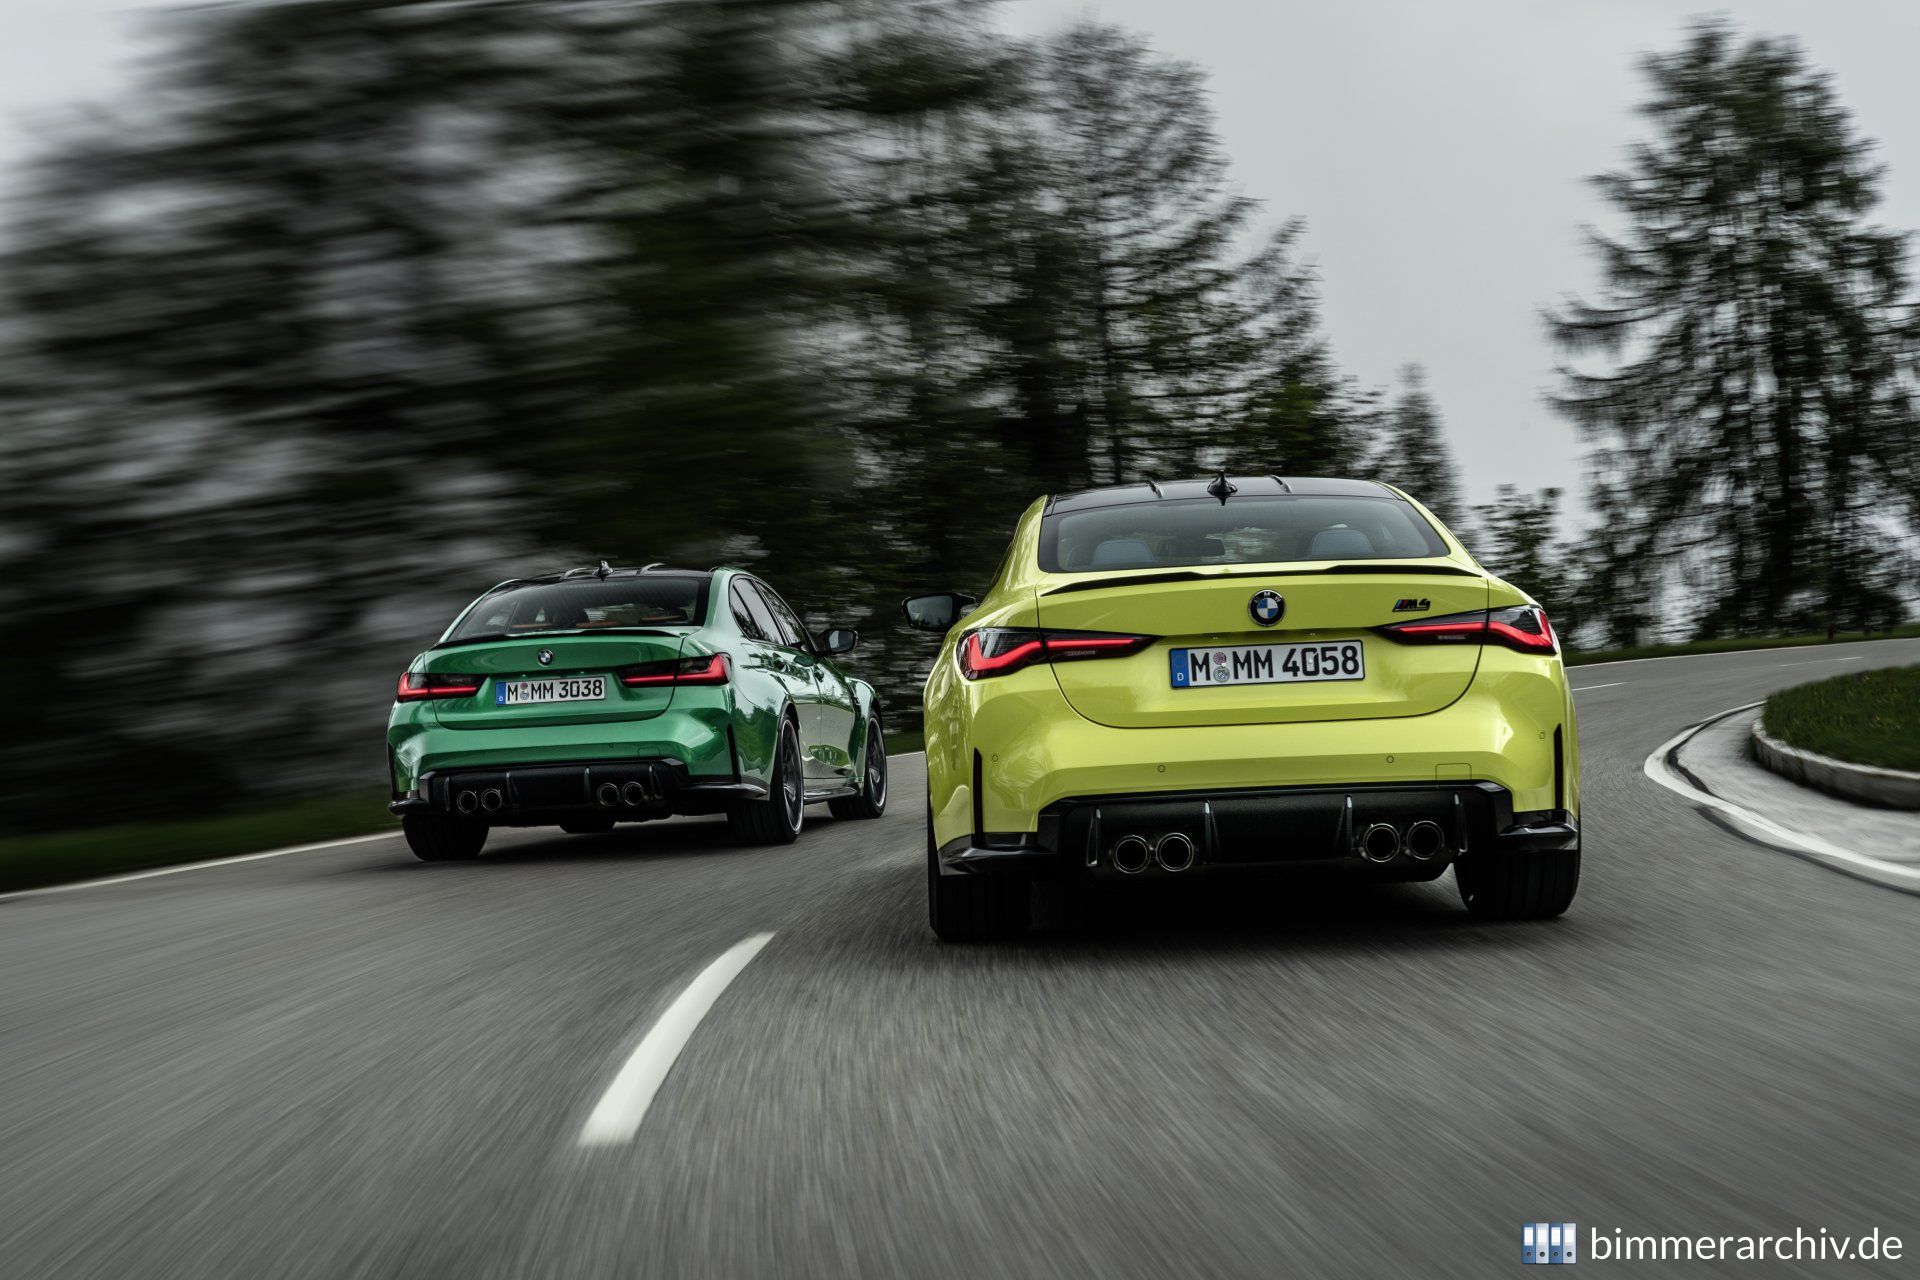 BMW M3 Competition Sedan and BMW M4 Competition Coupe